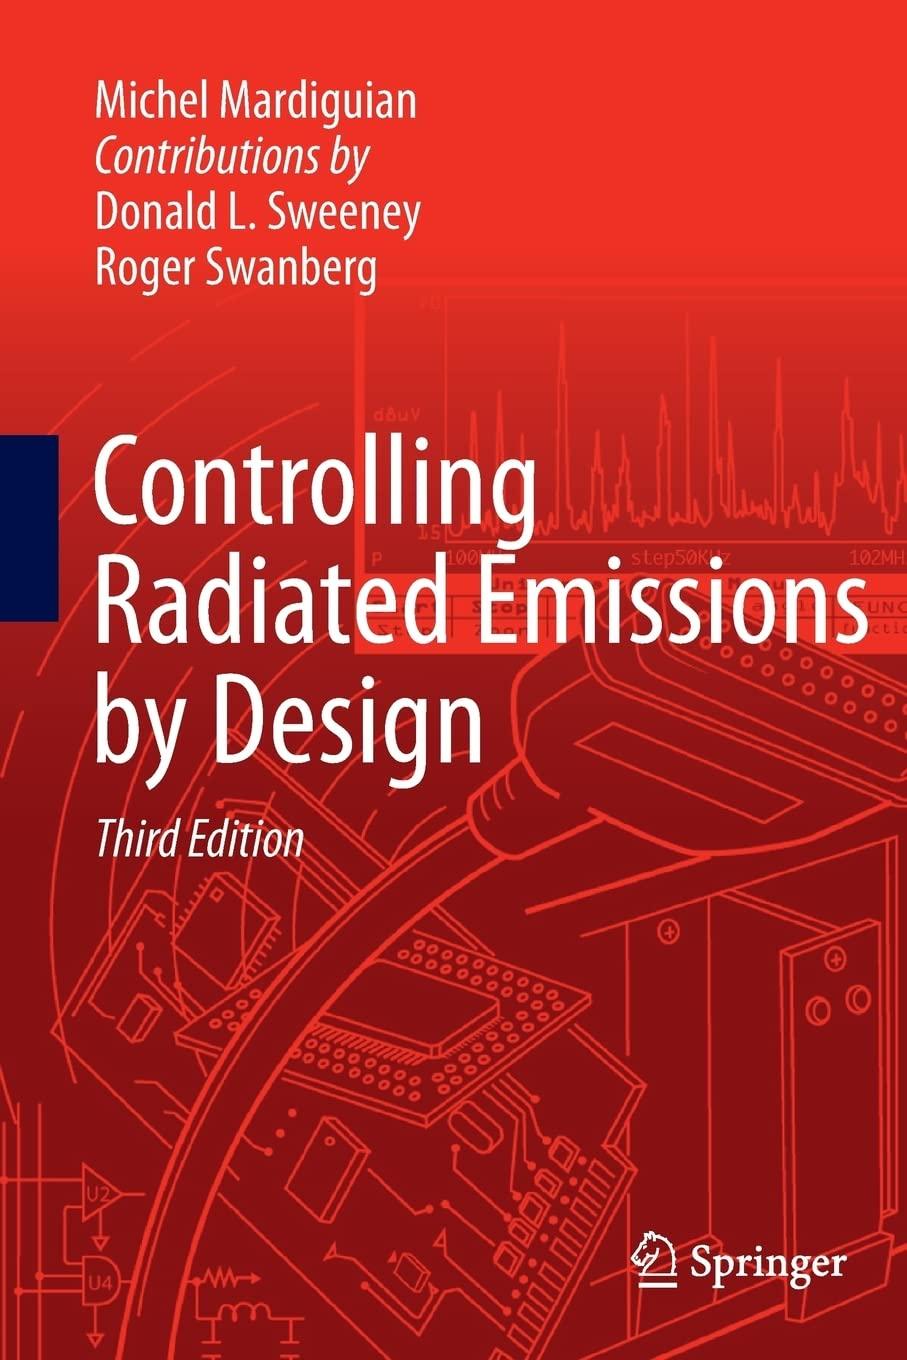 controlling radiated emissions by design 3rd edition michel mardiguian 3319330659, 978-3319330655